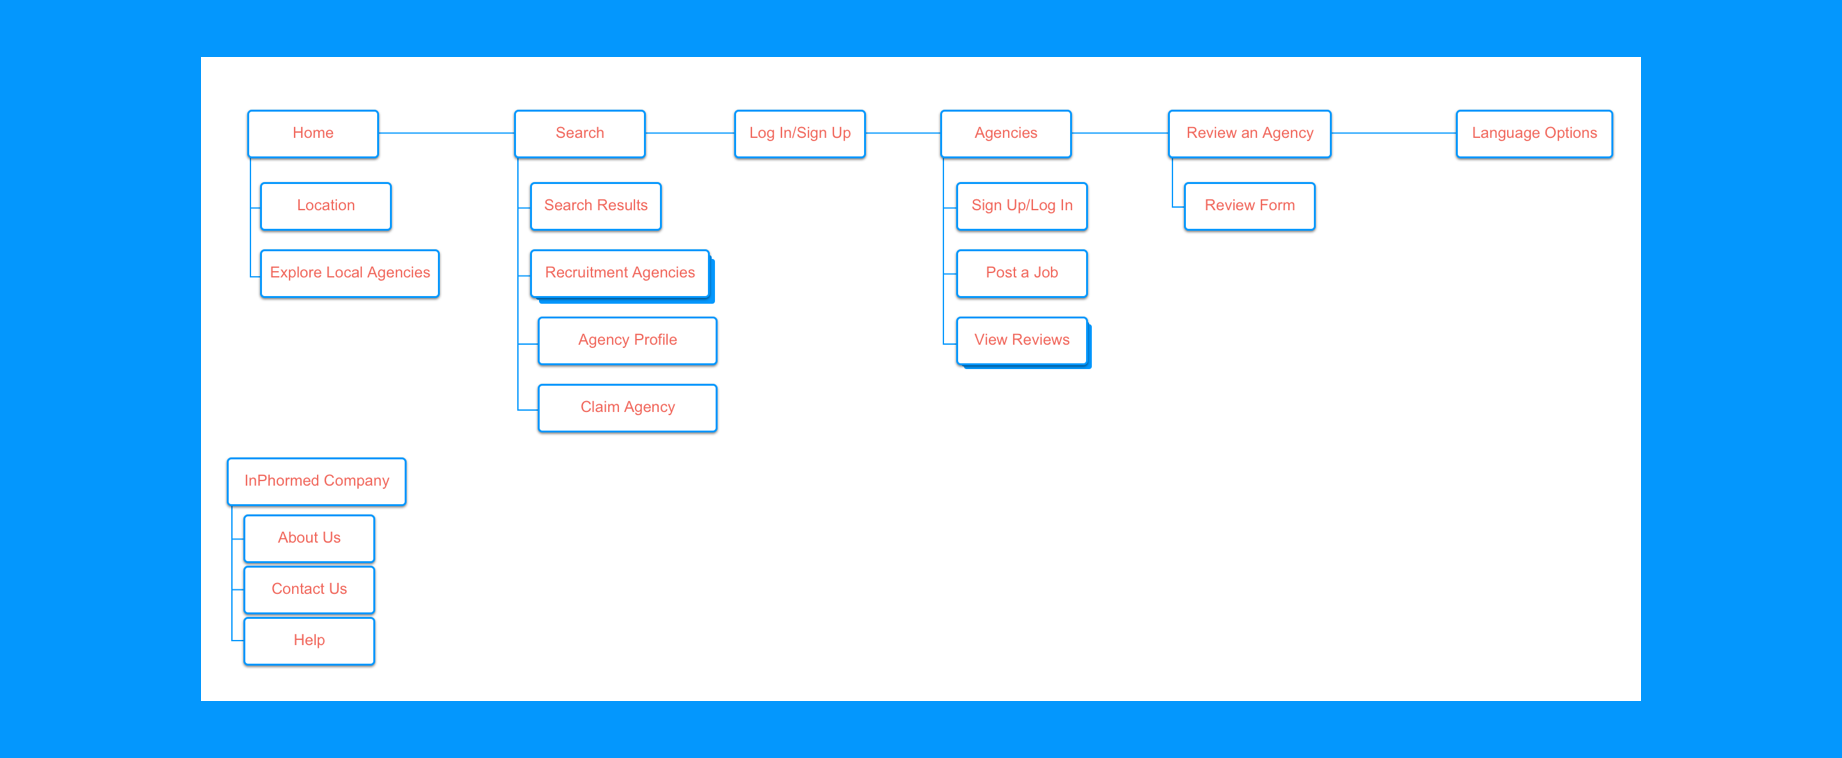 sitemap-background.png